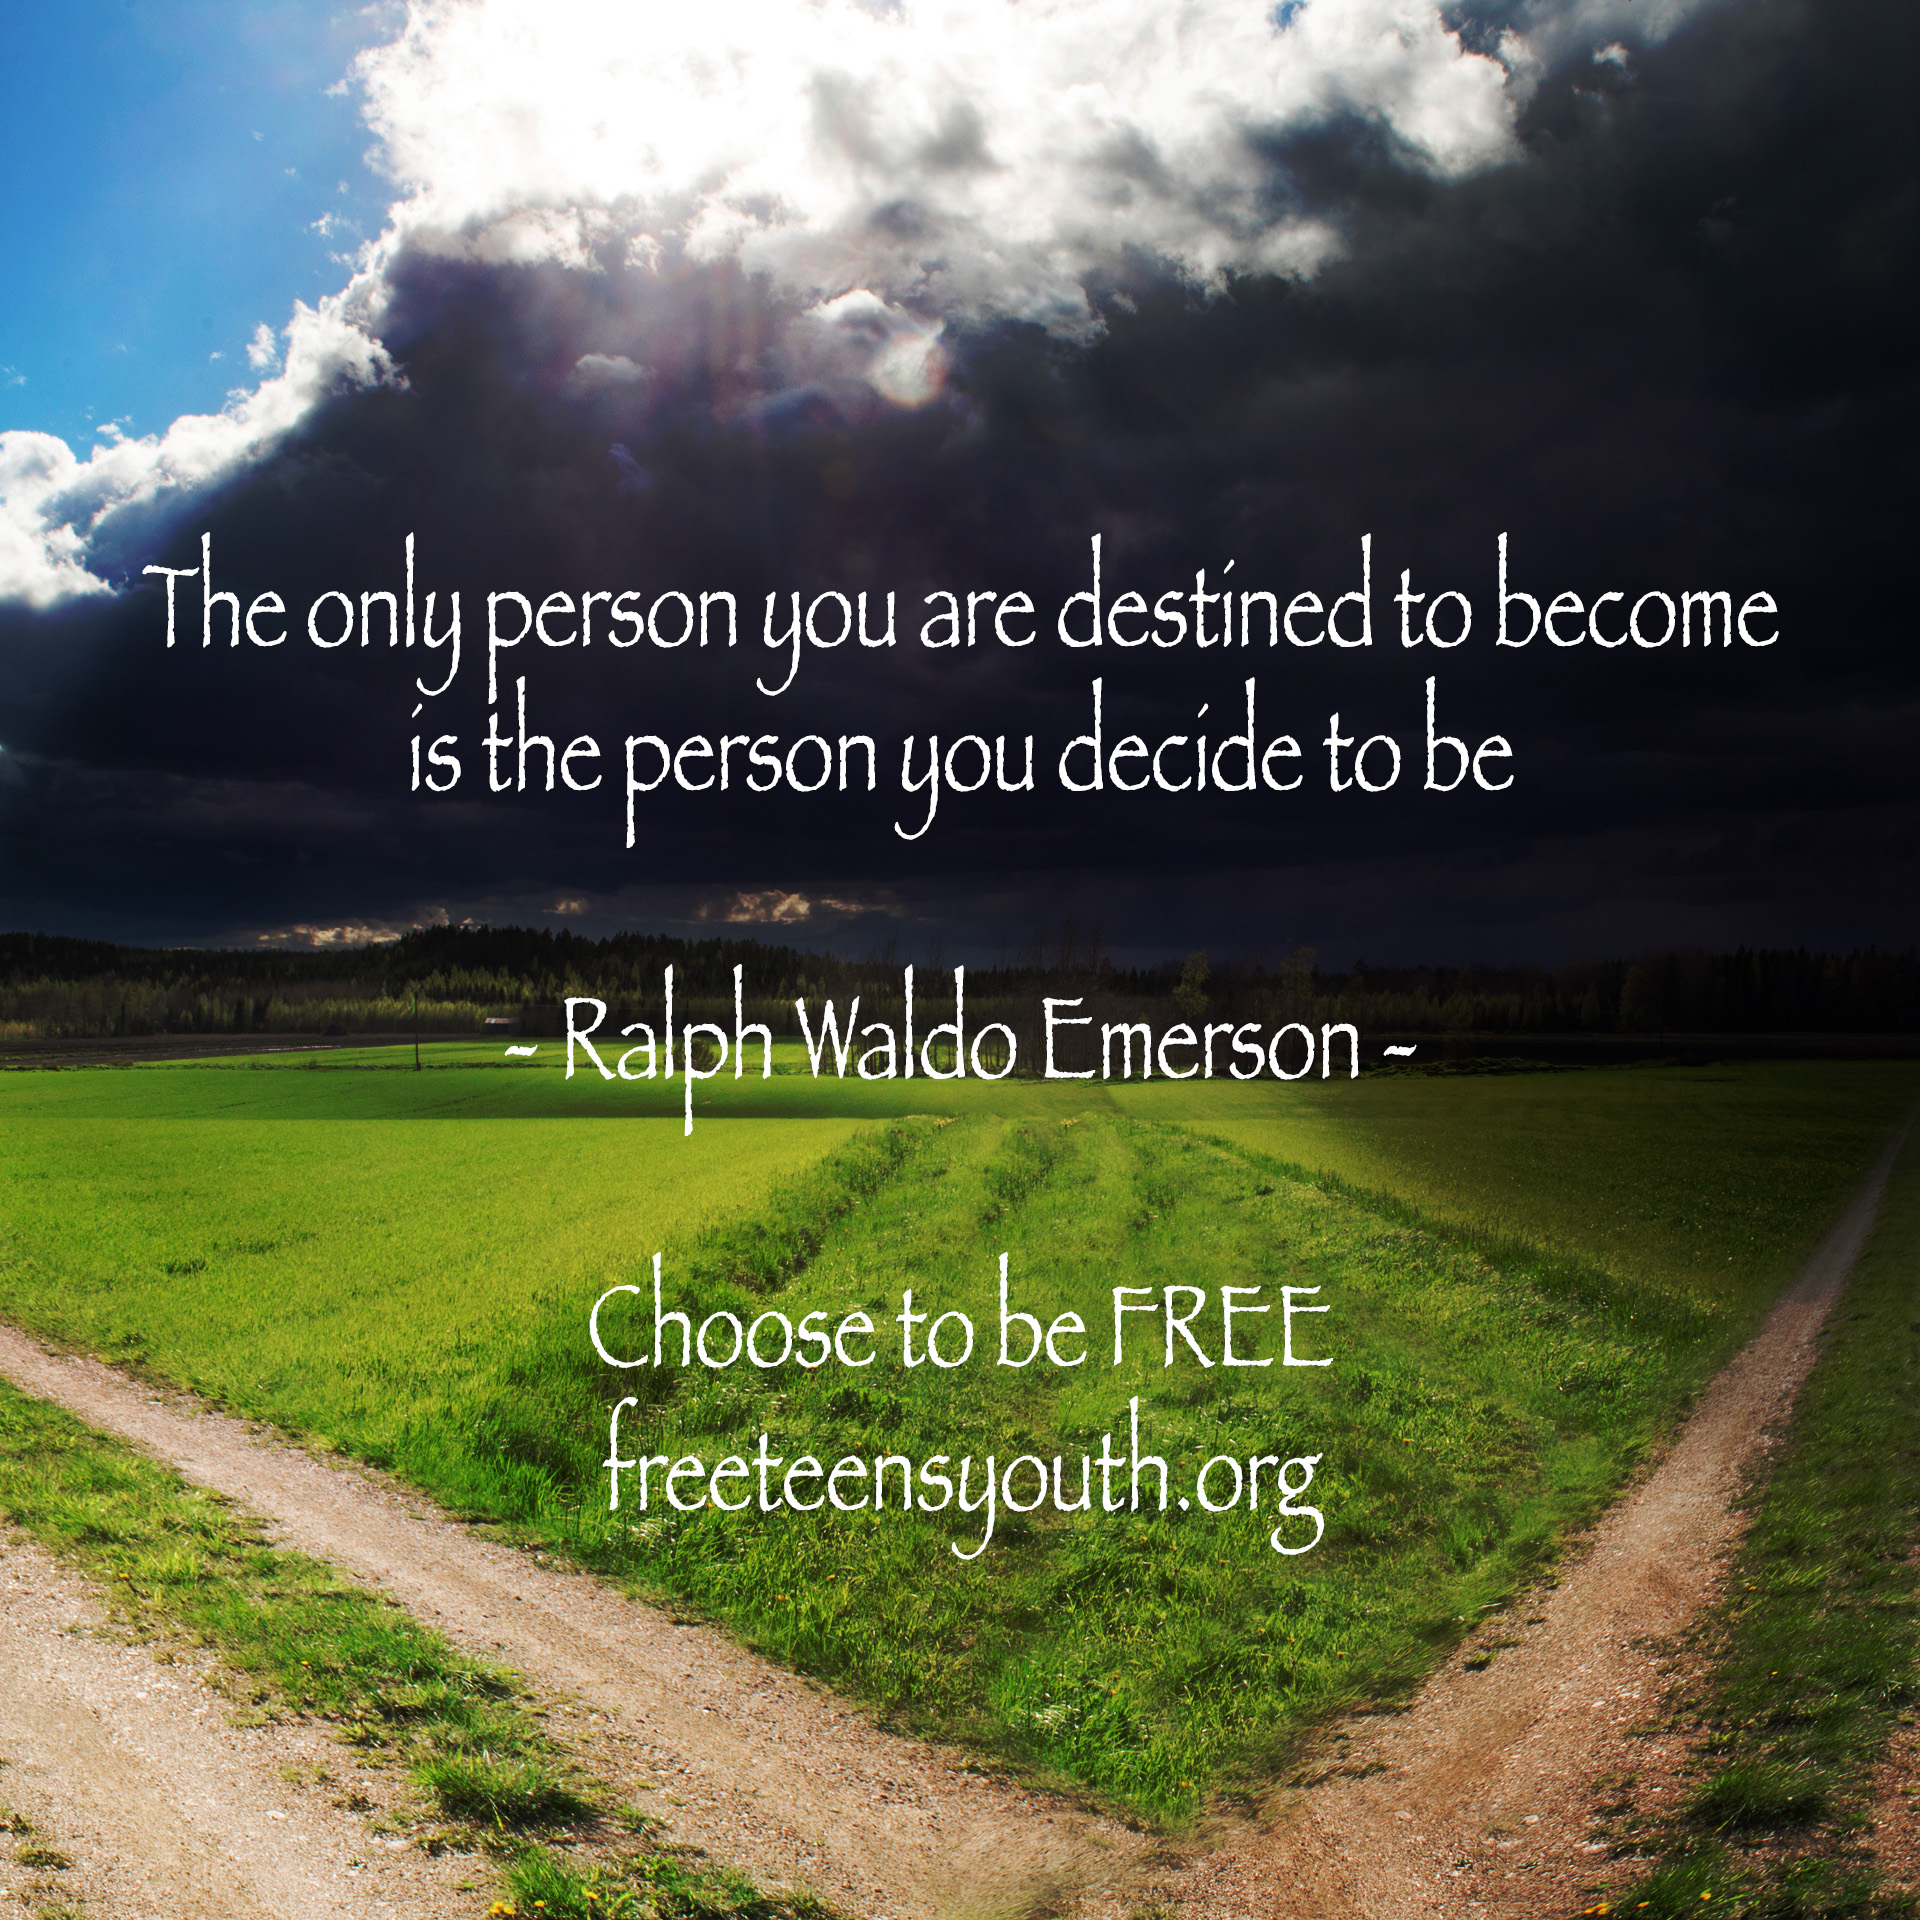 The only person you are destined to become is the person you decide to be - Ralph Waldo Emerson